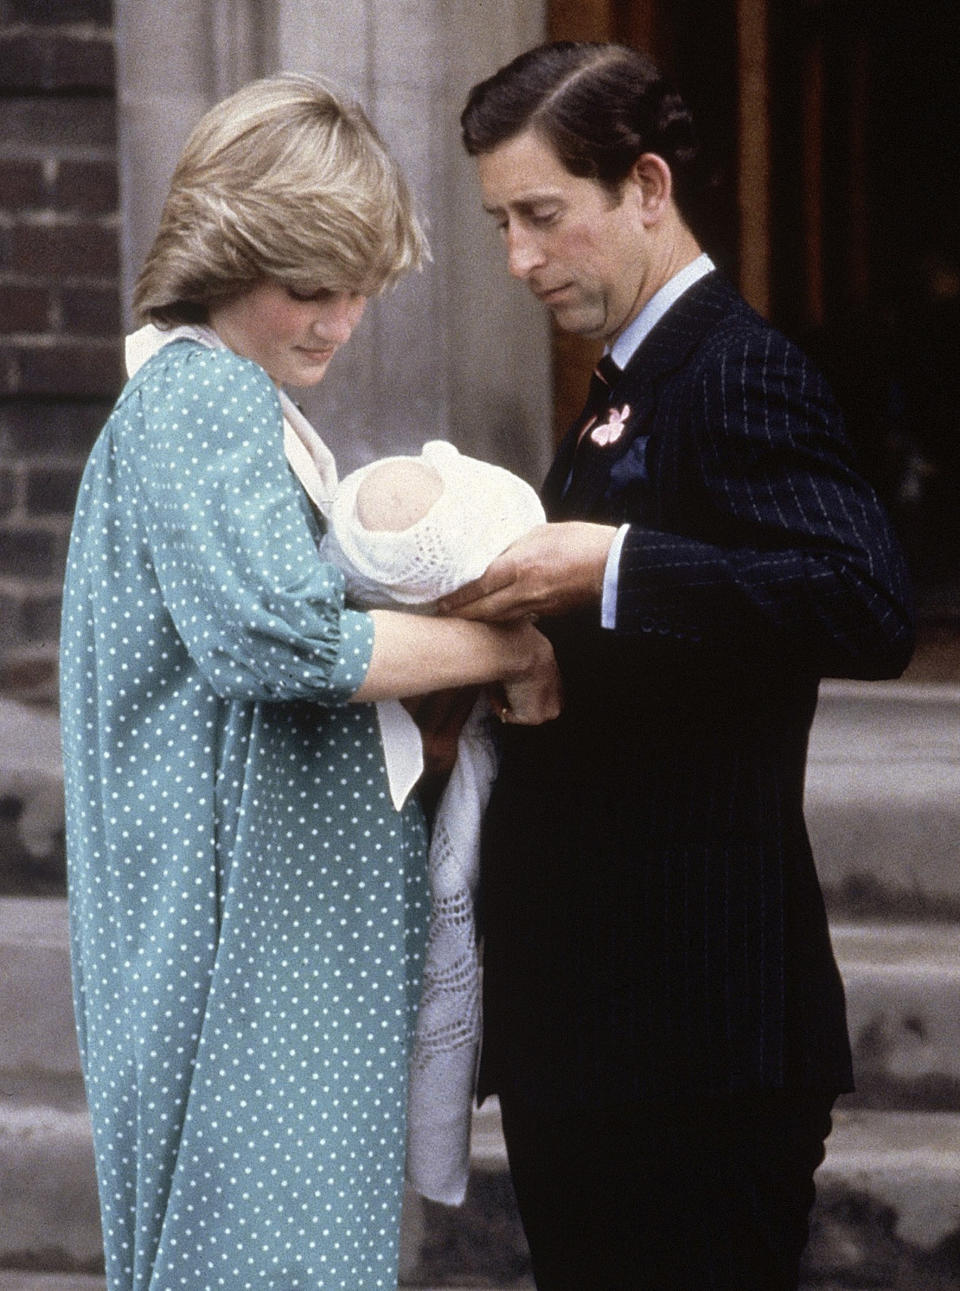 FILE - In this June 22, 1982, file photo, Britain's Prince Charles, Prince of Wales, and wife Princess Diana take home their newborn son Prince William, as they leave St. Mary's Hospital in London. The world watched as Prince William grew from a towheaded schoolboy to a dashing air-sea rescue pilot to a father of three. But as he turns 40 on Tuesday, June 21, 2022, William is making the biggest change yet: assuming an increasingly central role in the royal family as he prepares for his eventual accession to the throne. (AP Photo/John Redman, File)